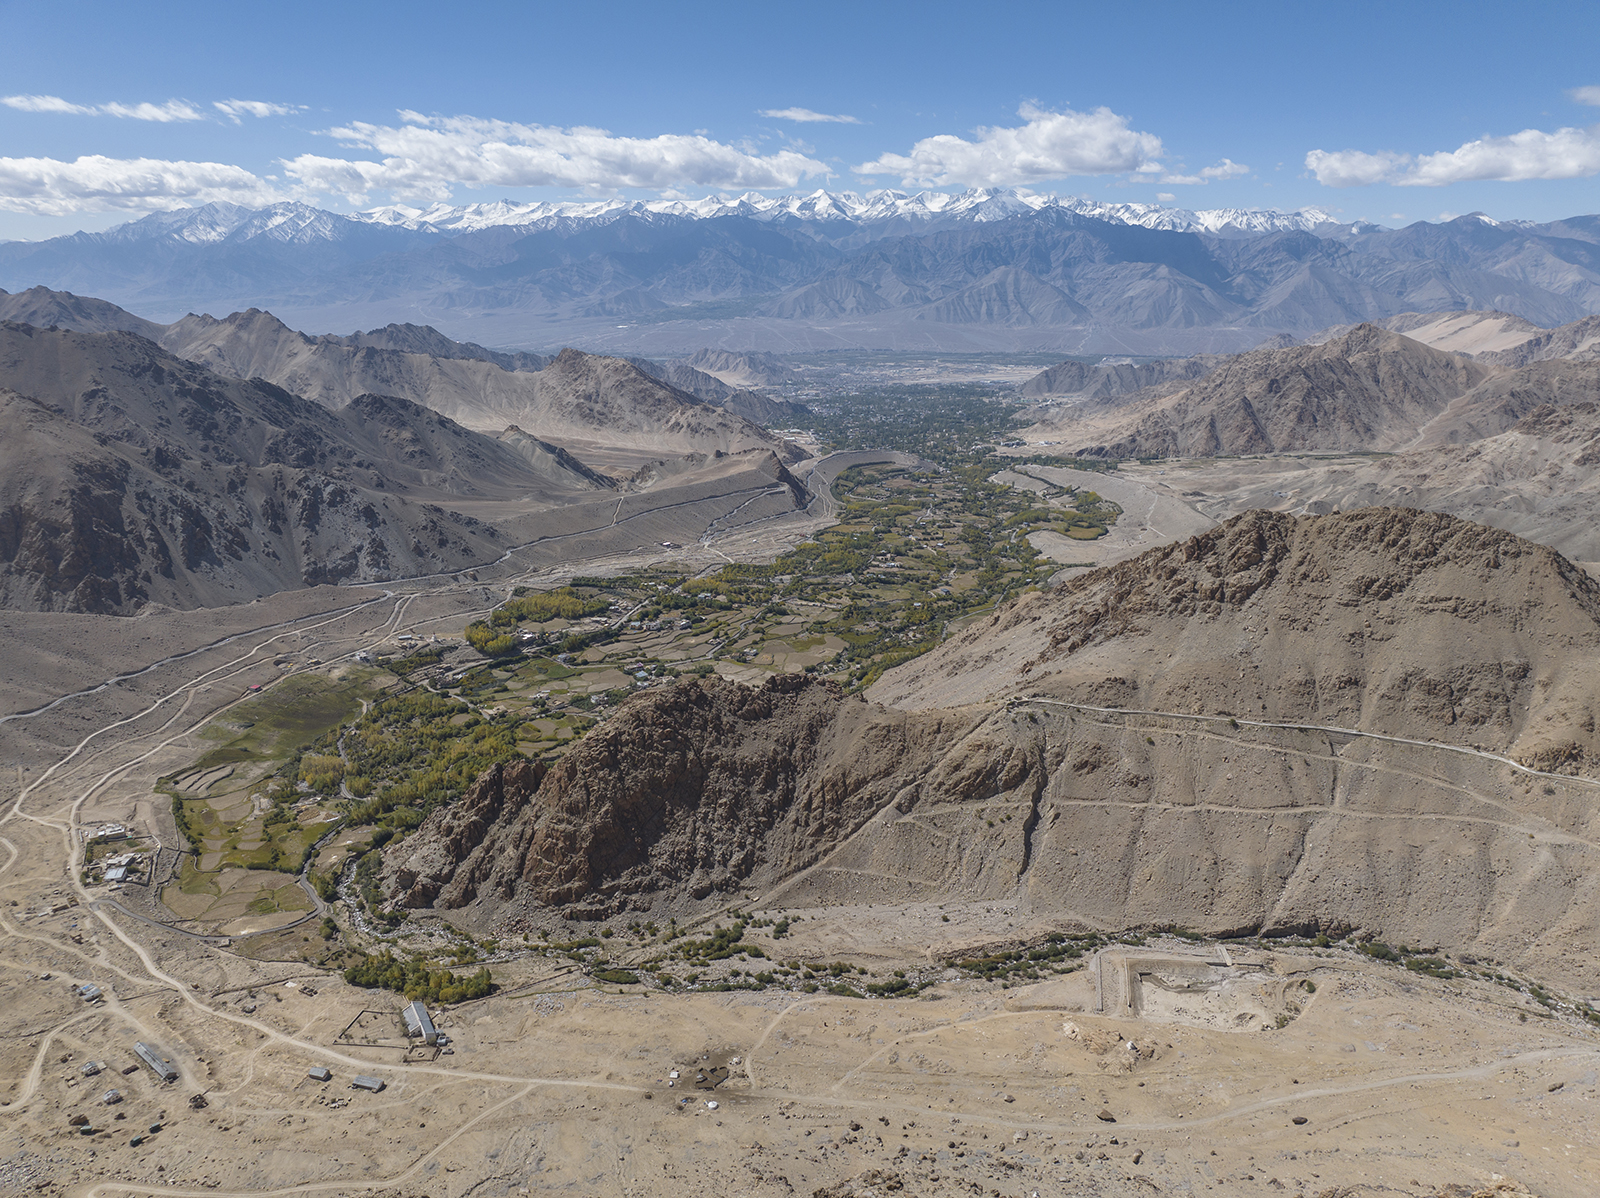 Leh in the distance from the road to Nubra